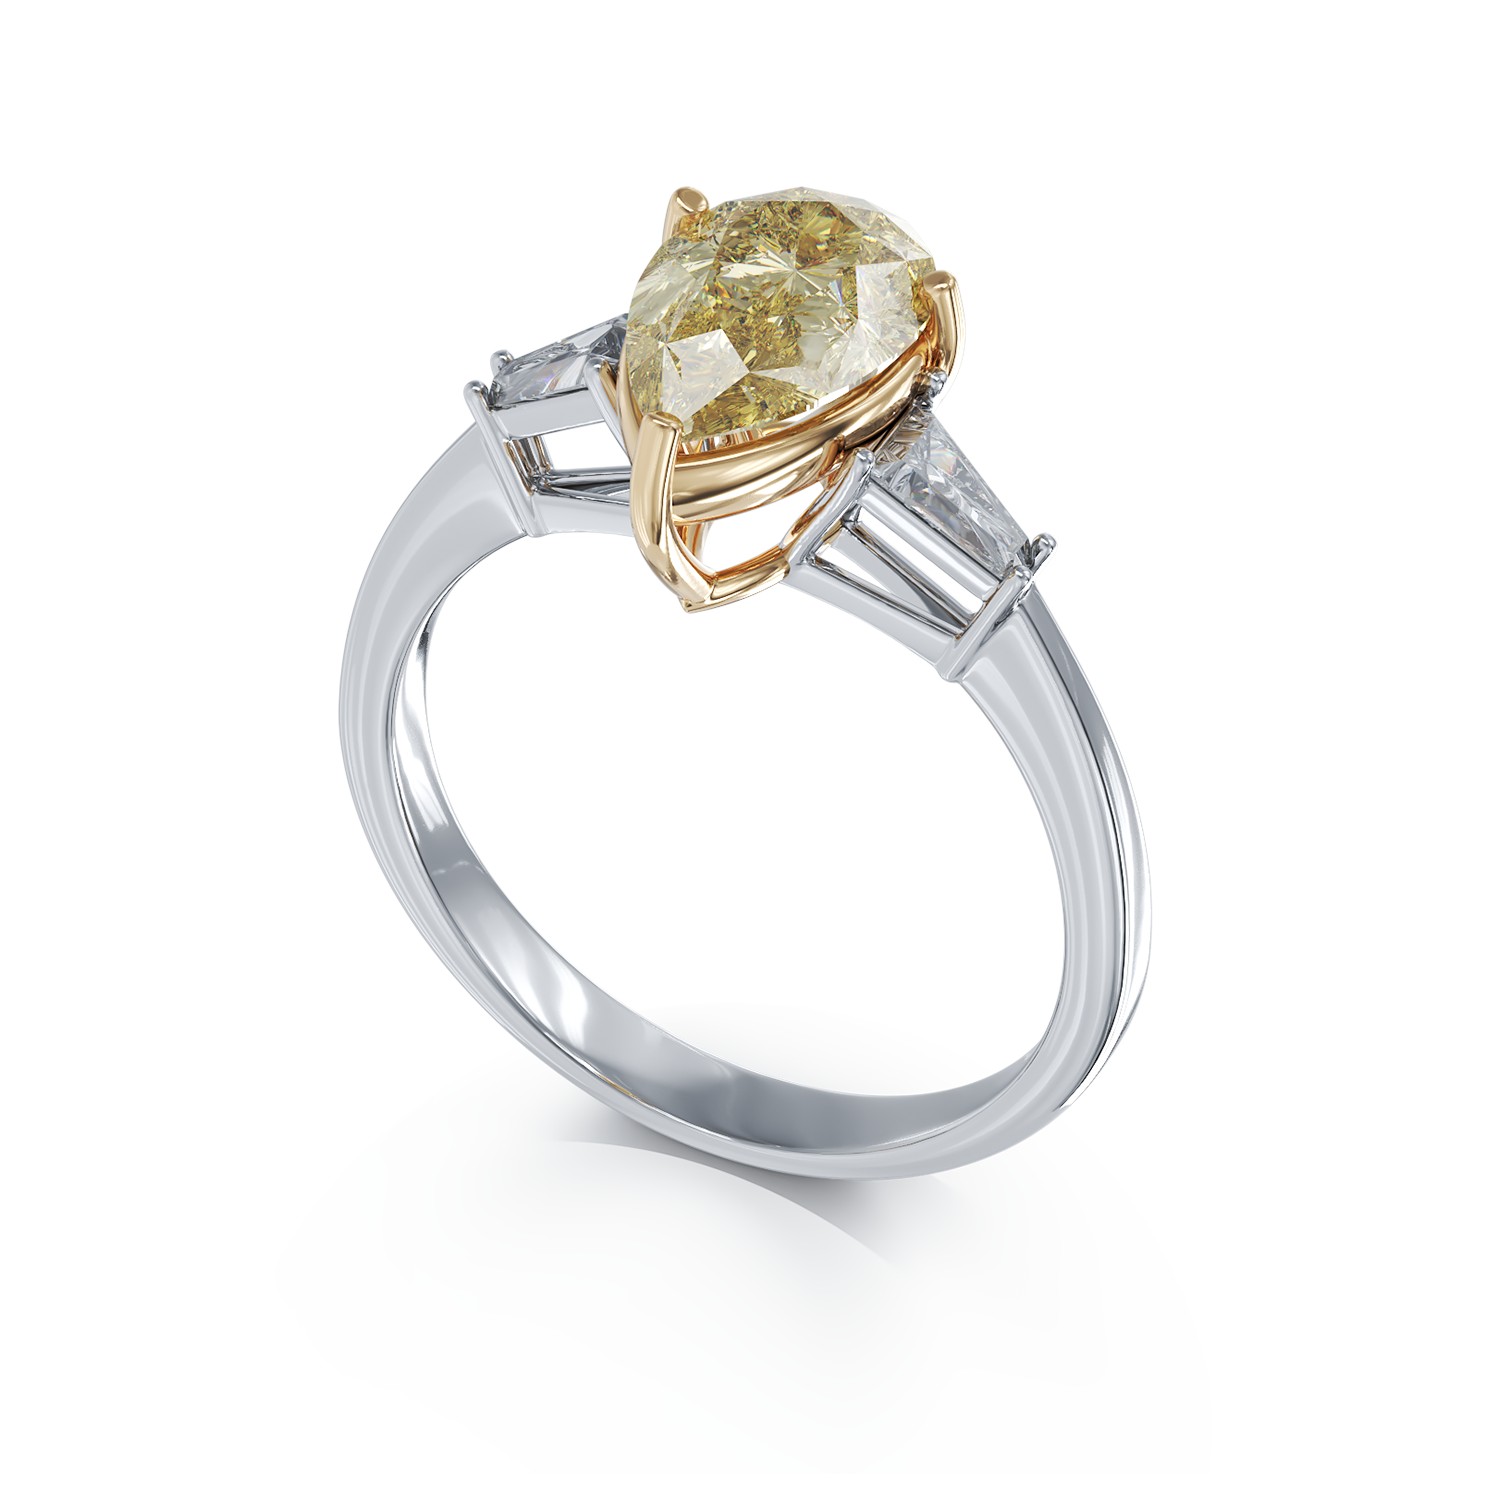 White-yellow gold engagement ring with 2ct diamond and 0.19ct diamonds